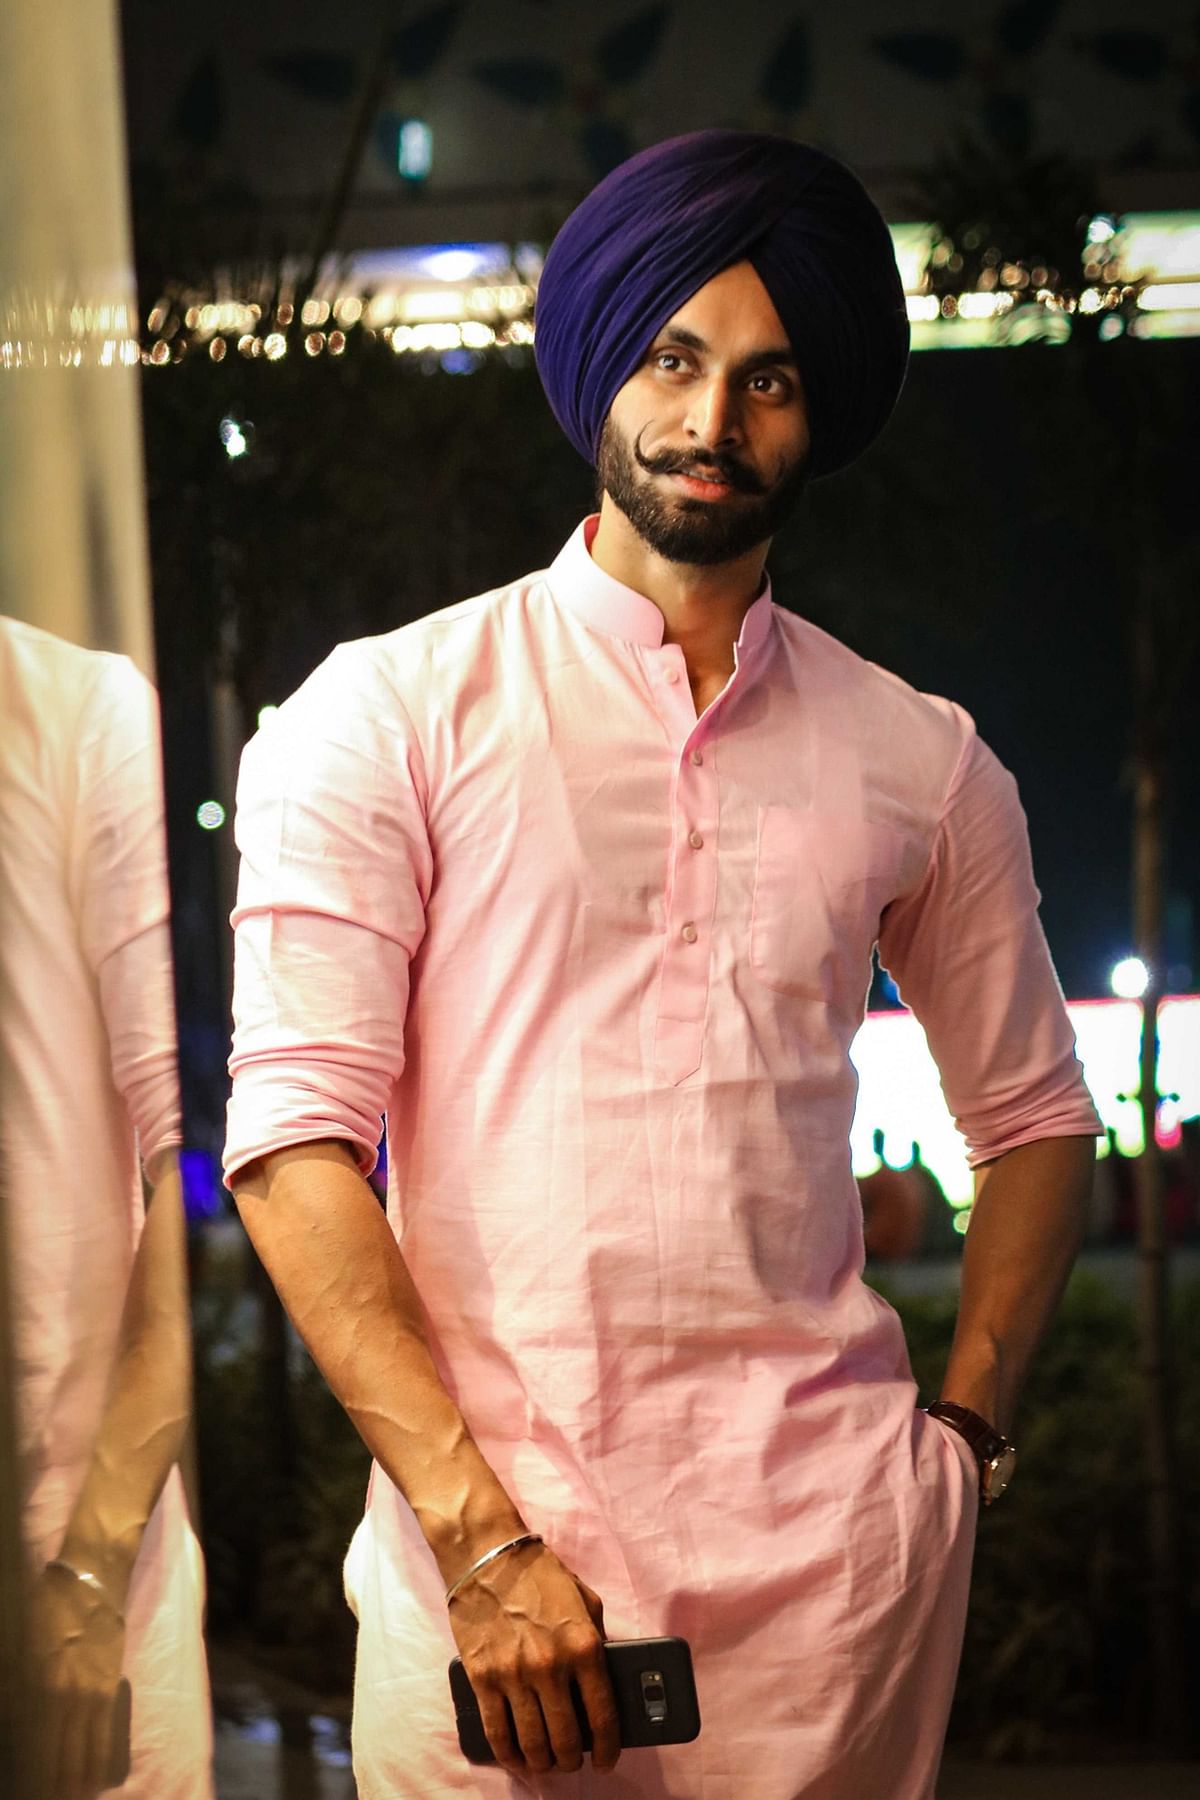 “My turban completes me. Without it, what remains is a man who is like an umbrella without the ribs,” says Sidhu.